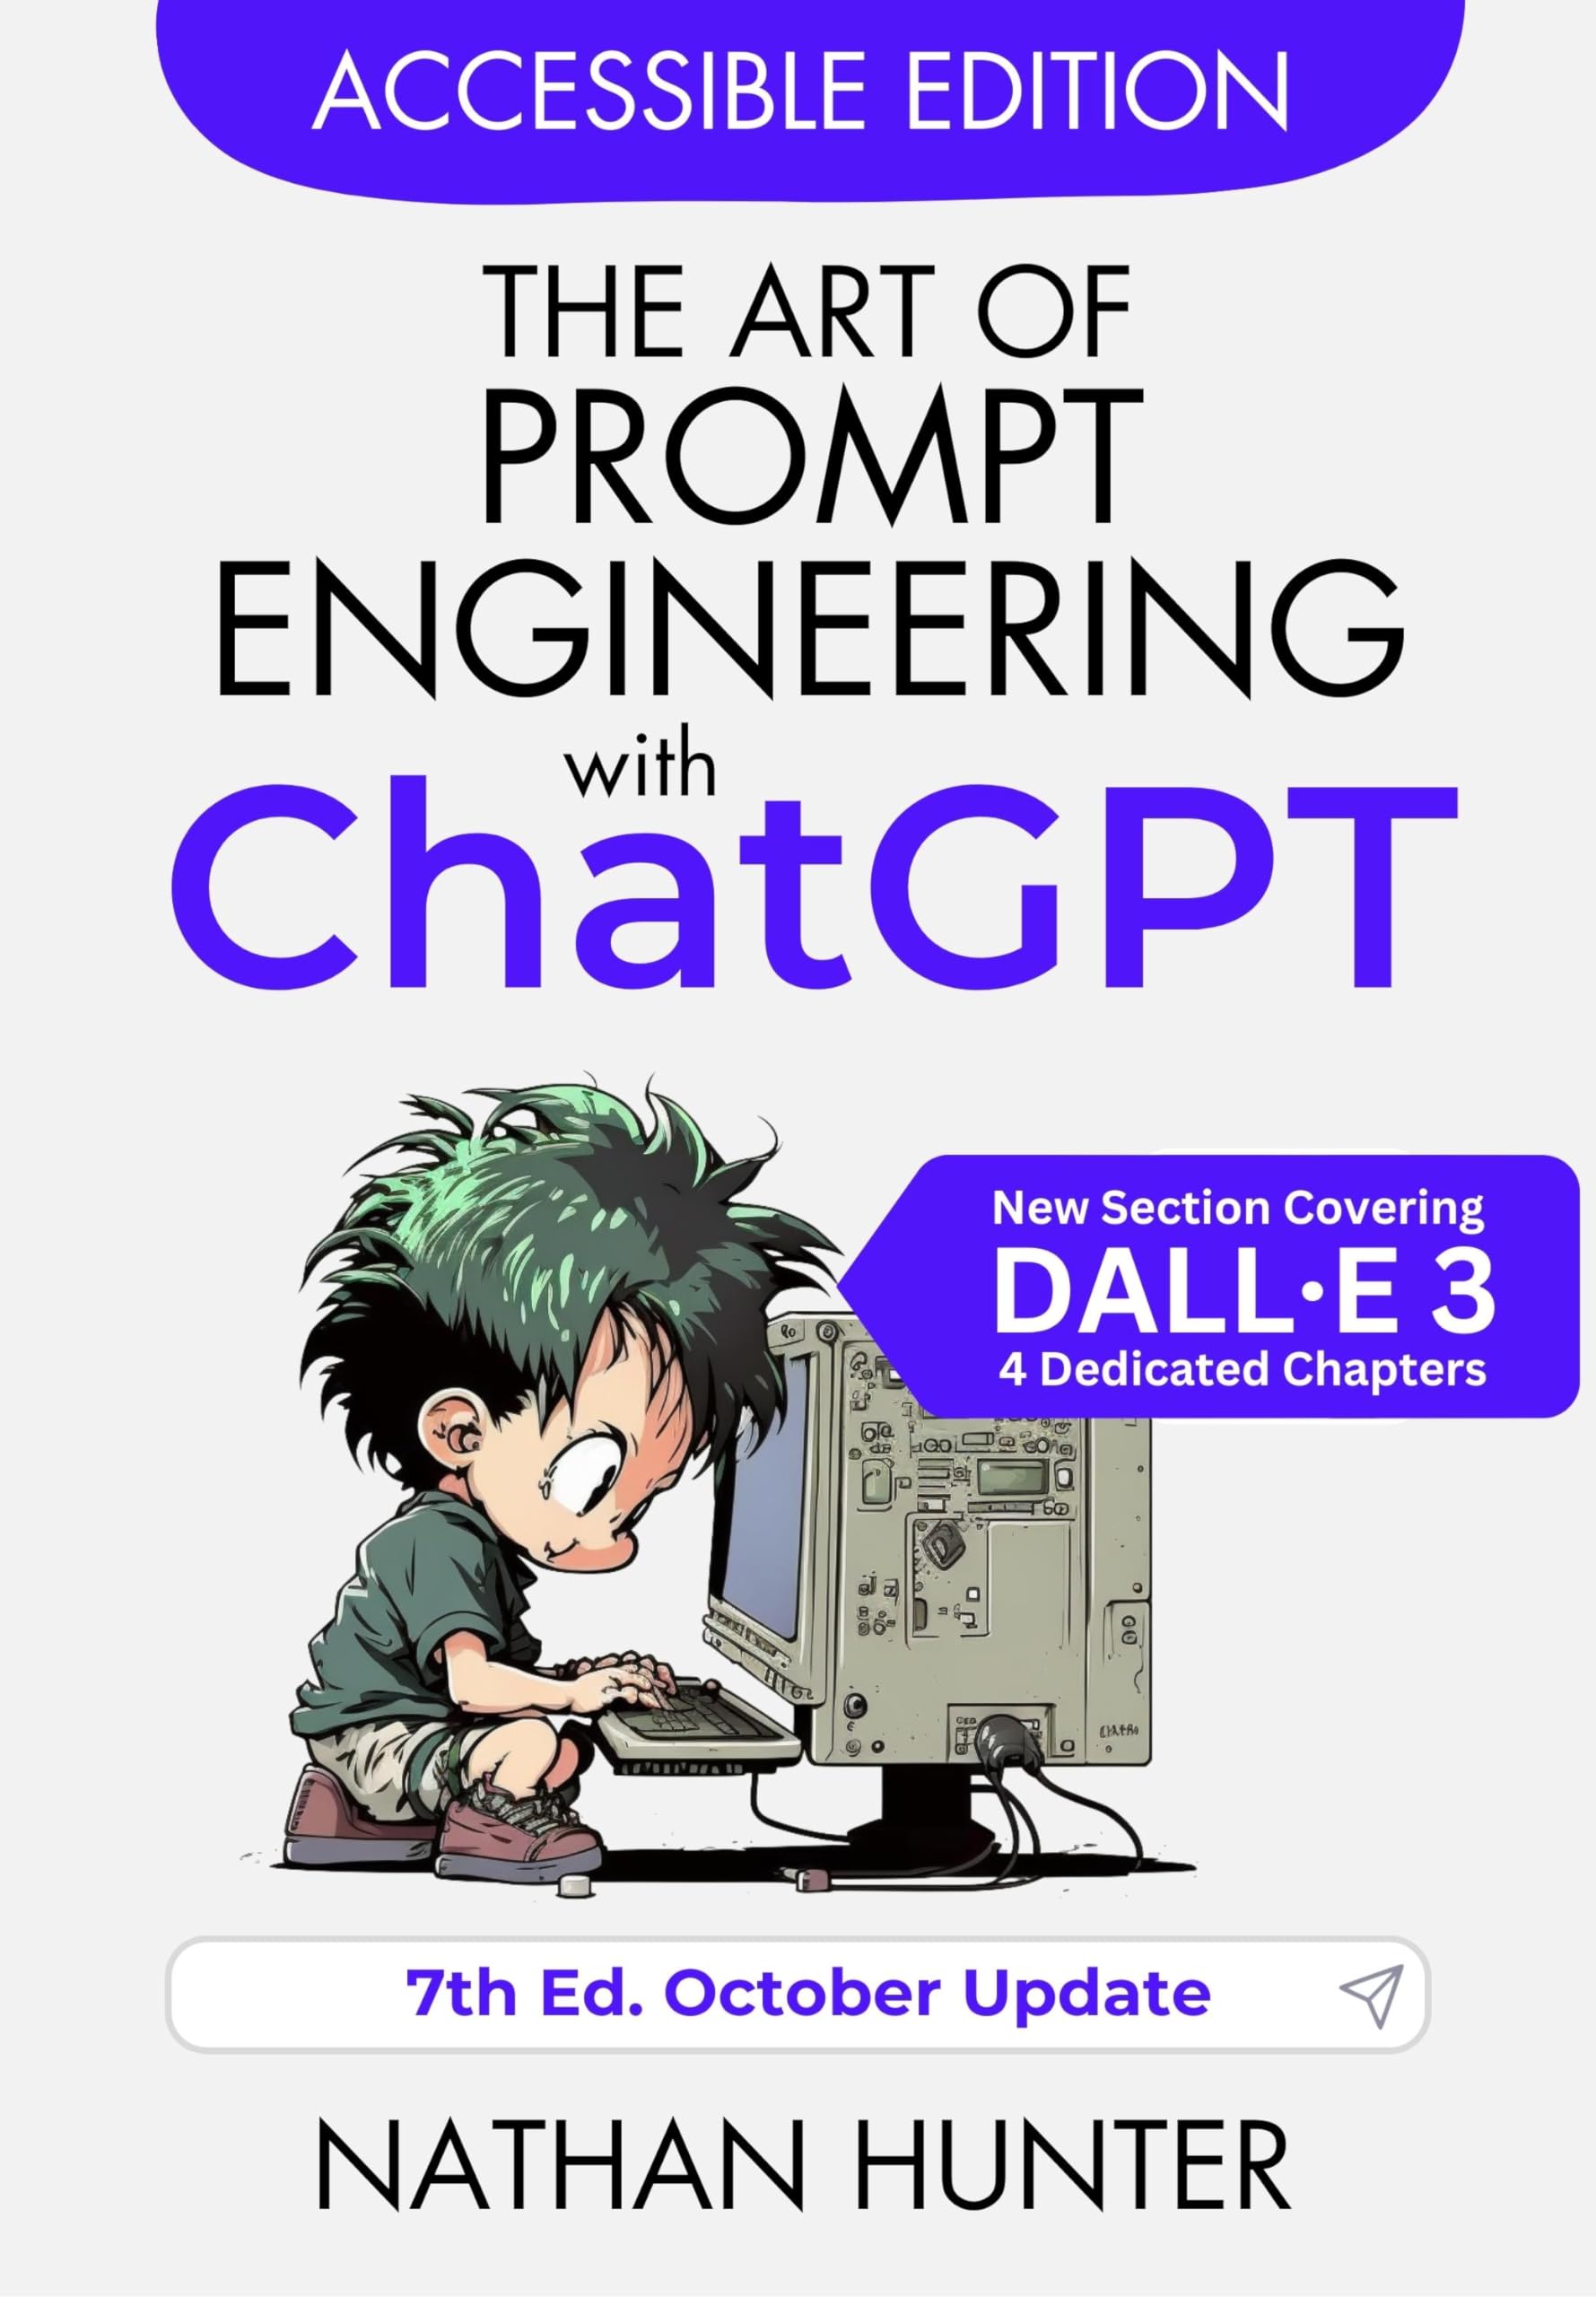 The Art of Prompt Engineering with ChatGPT: Accessible Edition (Learn AI Tools the Fun Way! Book 2)